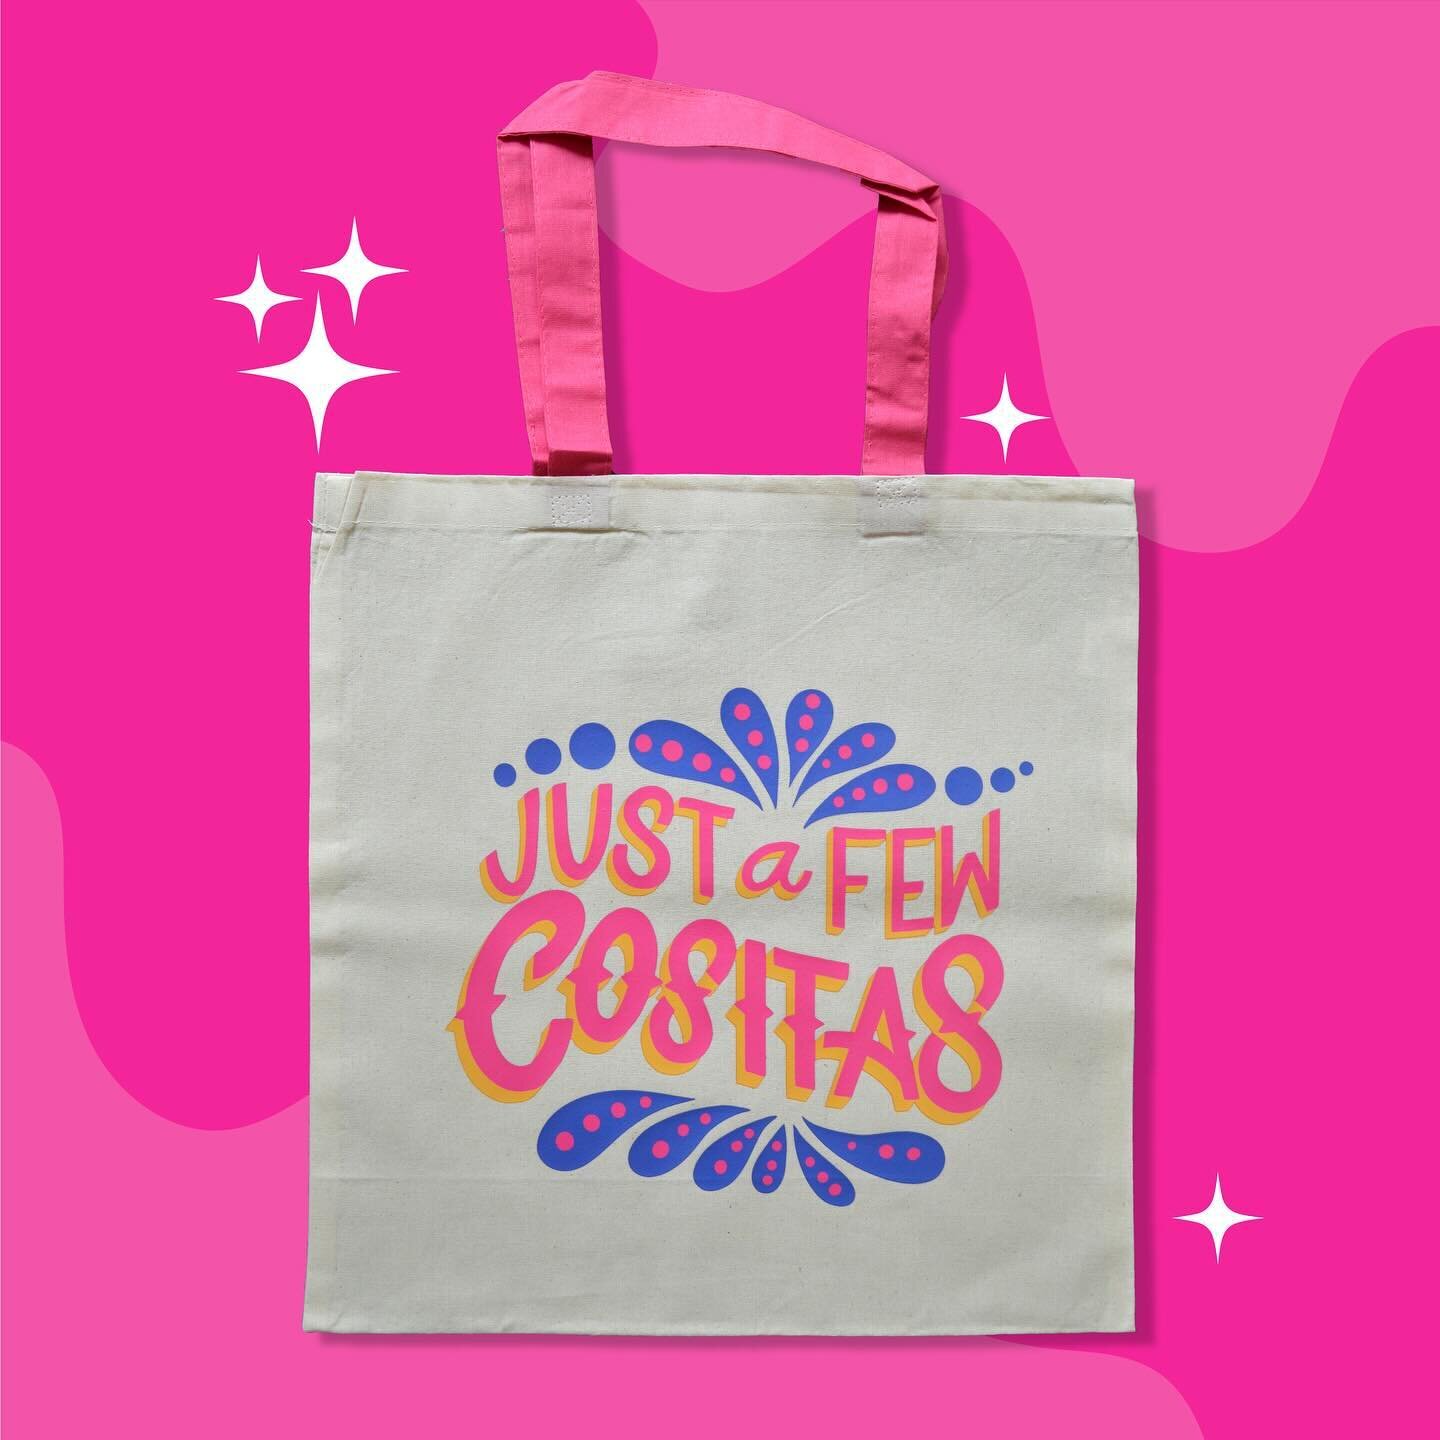 JUST ADDED ✨✨ Just a Few Cositas and Tiger Jungle Tote Bags!!! 🐯🌷🌺🌹 You&rsquo;ll most likely find them @thesocomarket this SATURDAY. See you all then 🤩.
#smallbiz #totebags #friyay